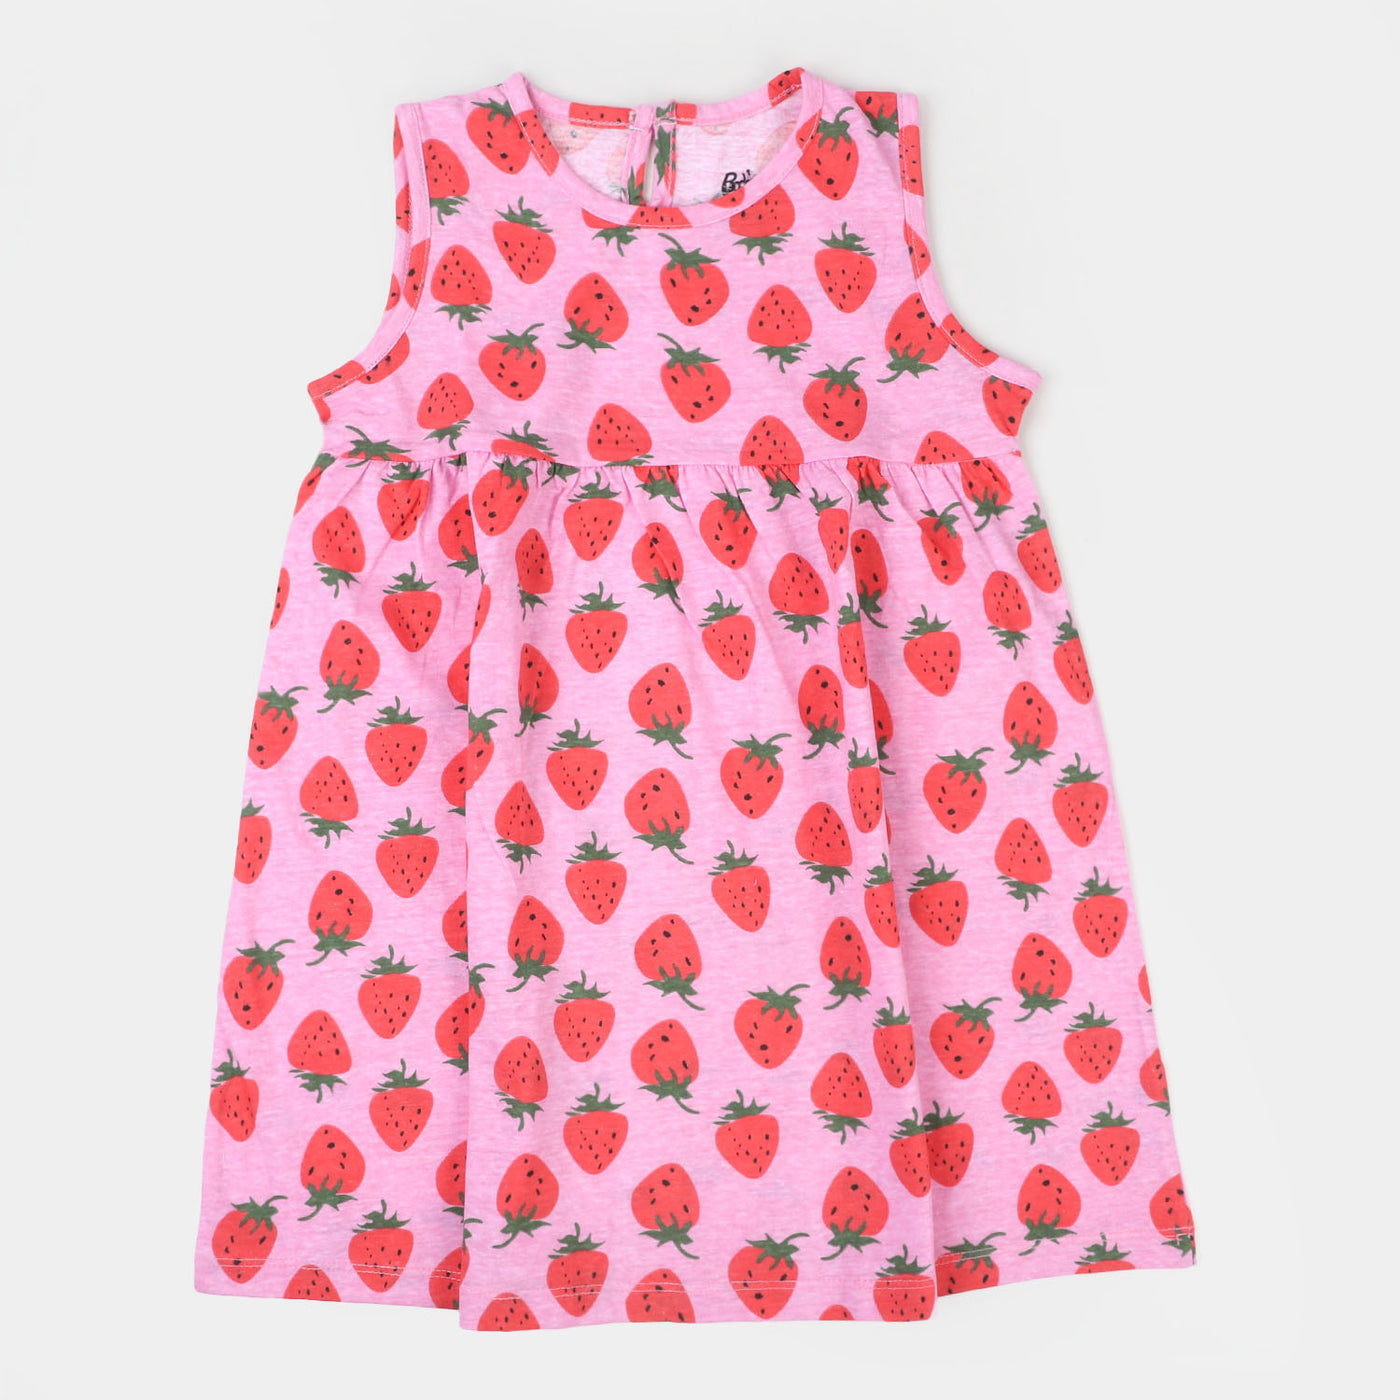 Girls Knitted Frock Strawberry - Pink